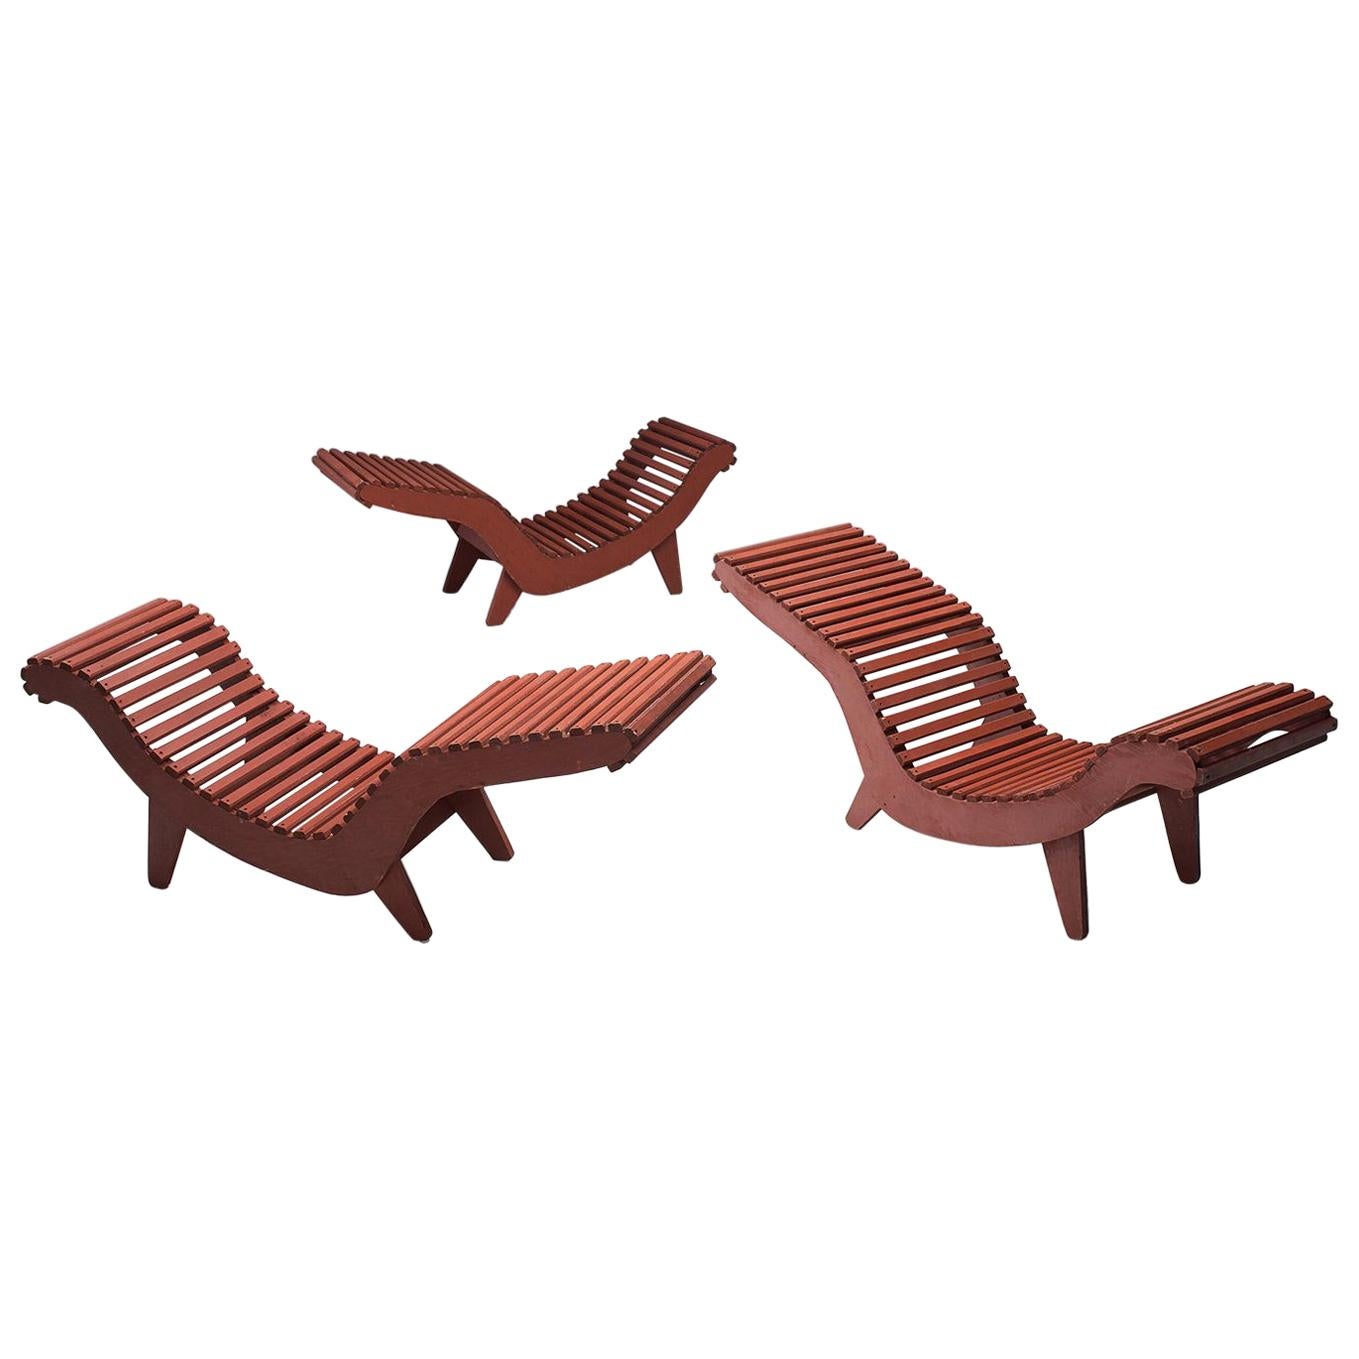 Klaus Grabe Sculptural Deep Red Chaise Lounges